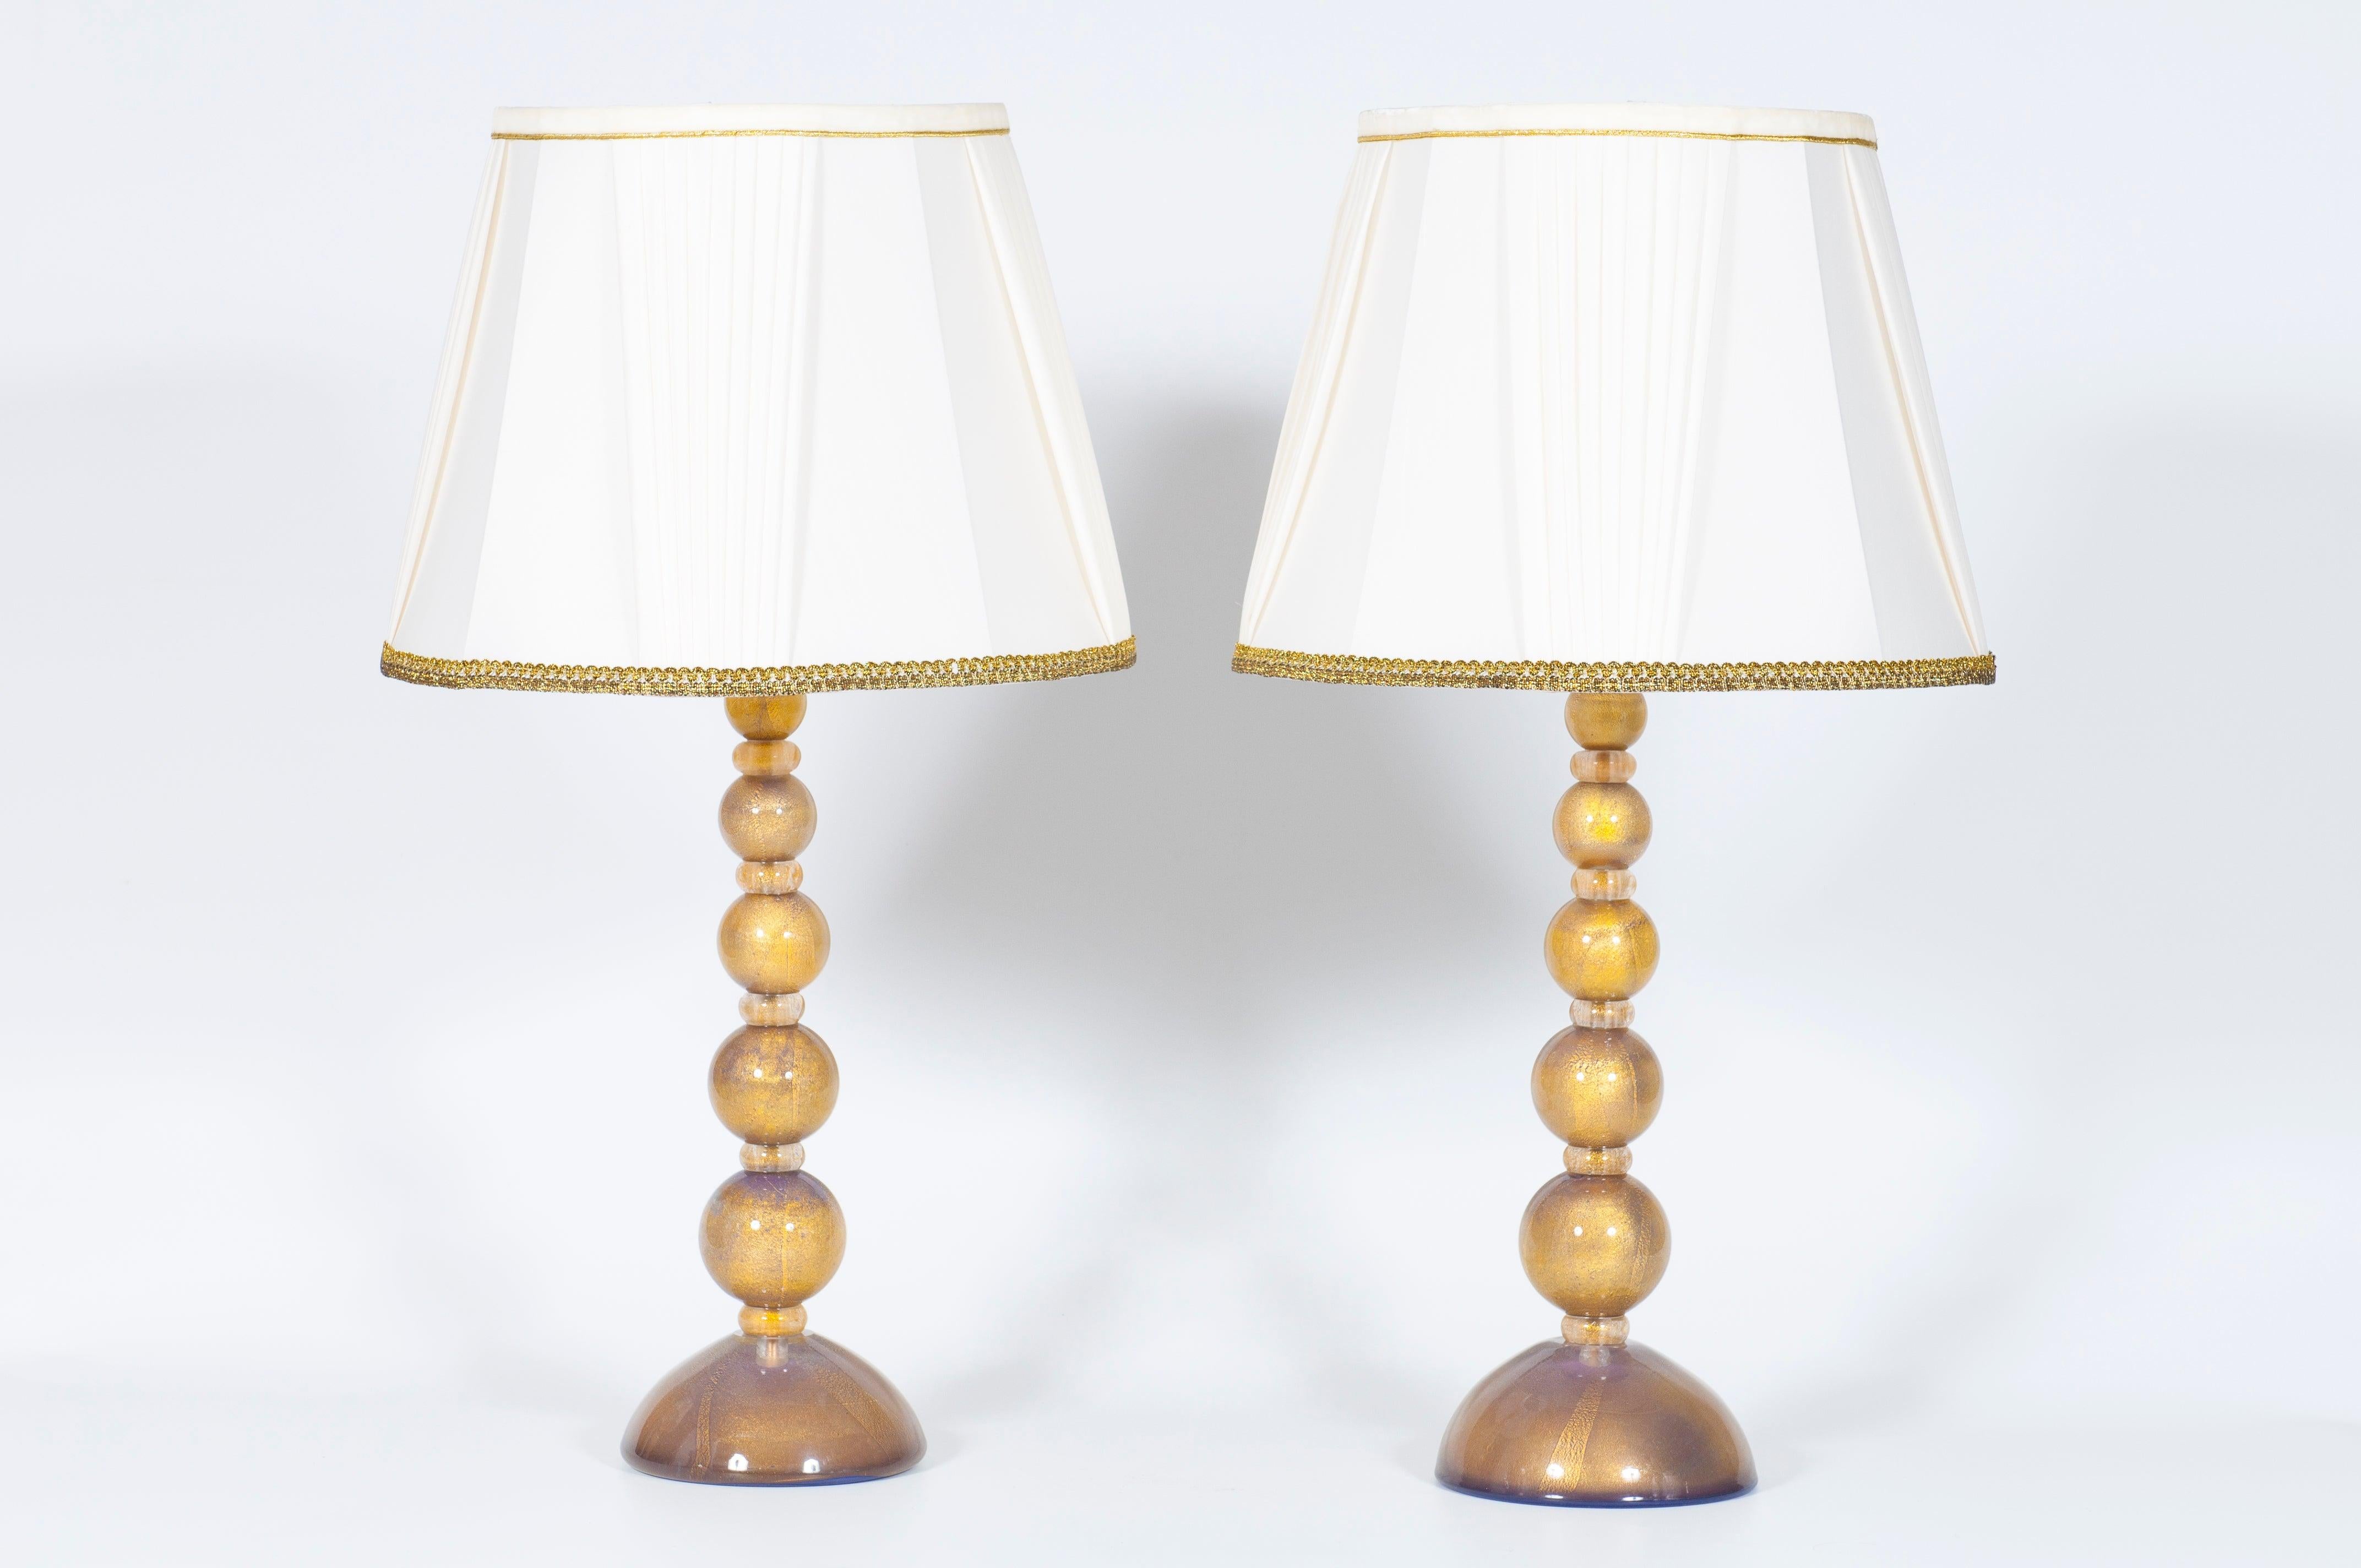 A Pair of Exquisite Murano Glass Table Lamps with Purple and Gold Accents, Italian Design from the 2000s.
This exceptional pair of table lamps, entirely handcrafted from blown Murano glass, embodies the artistry and elegance of Italian design. Each